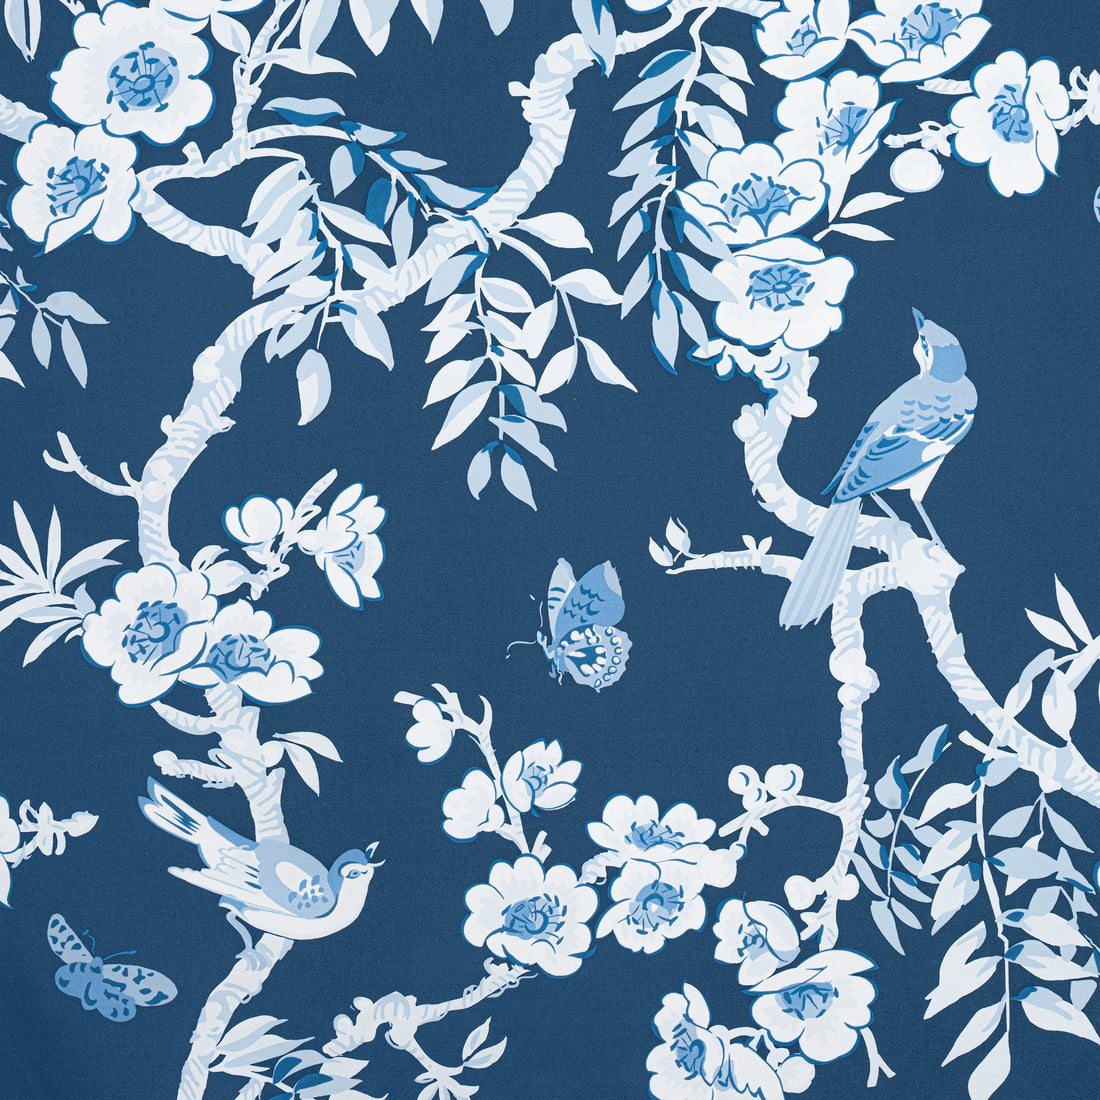 Yukio fabric in navy and white color - pattern number F920844 - by Thibaut in the Eden collection